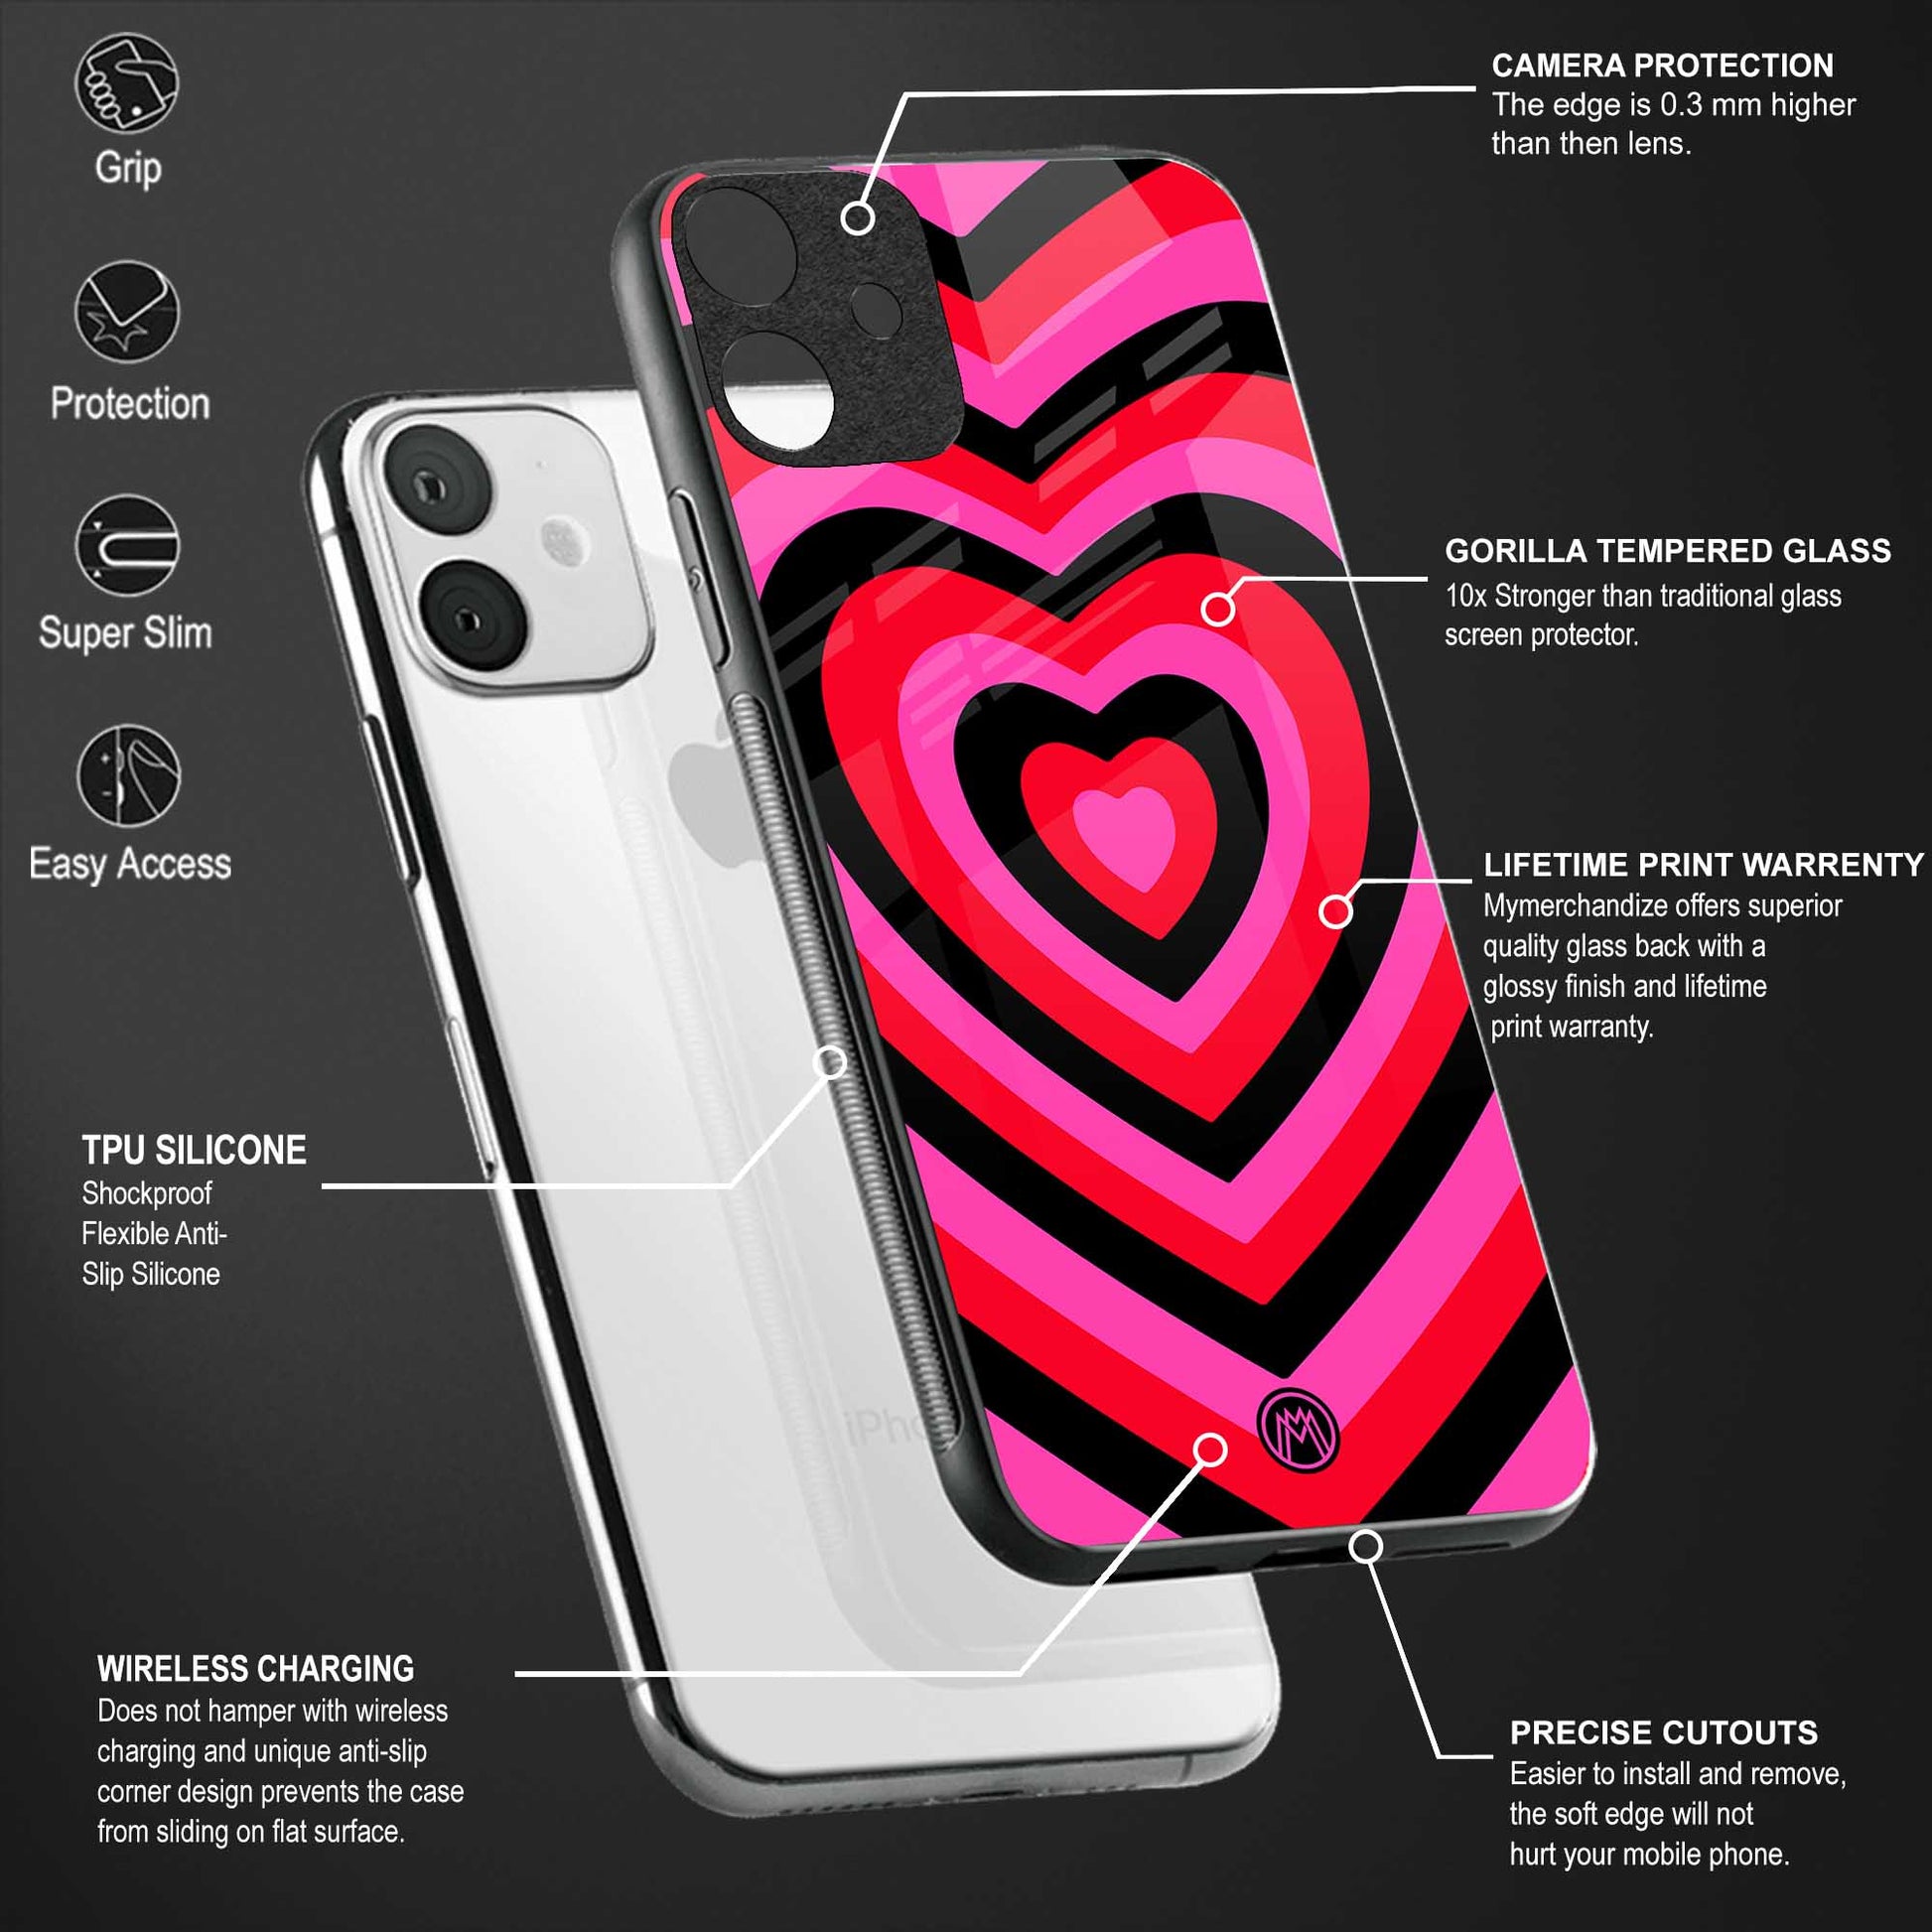 y2k black pink hearts aesthetic back phone cover | glass case for vivo y16